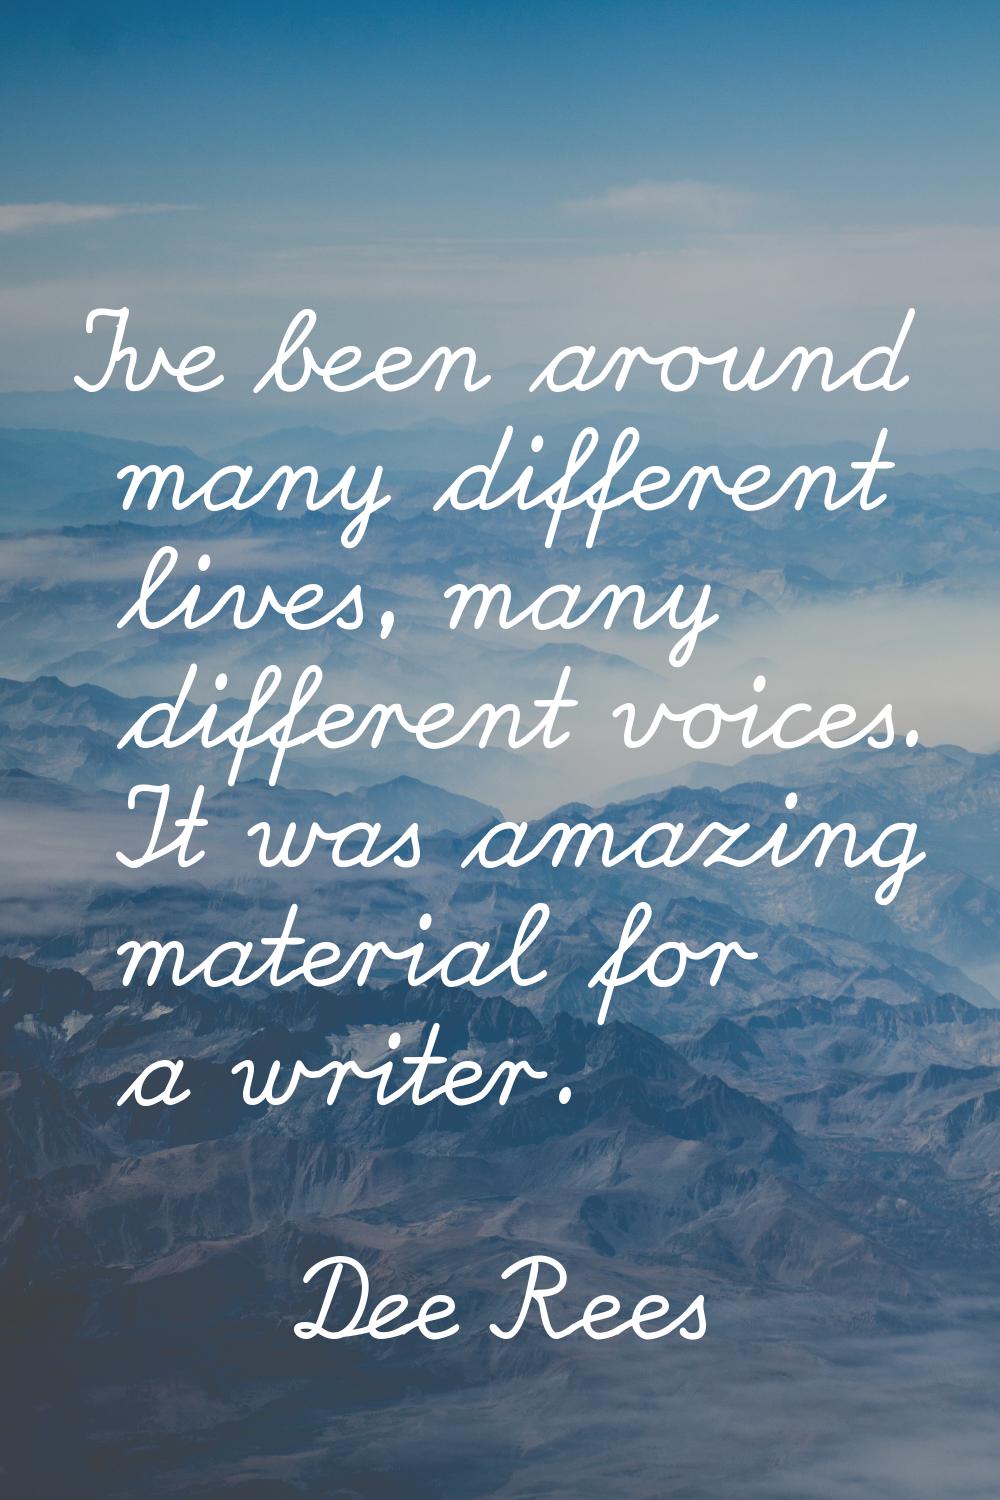 I've been around many different lives, many different voices. It was amazing material for a writer.